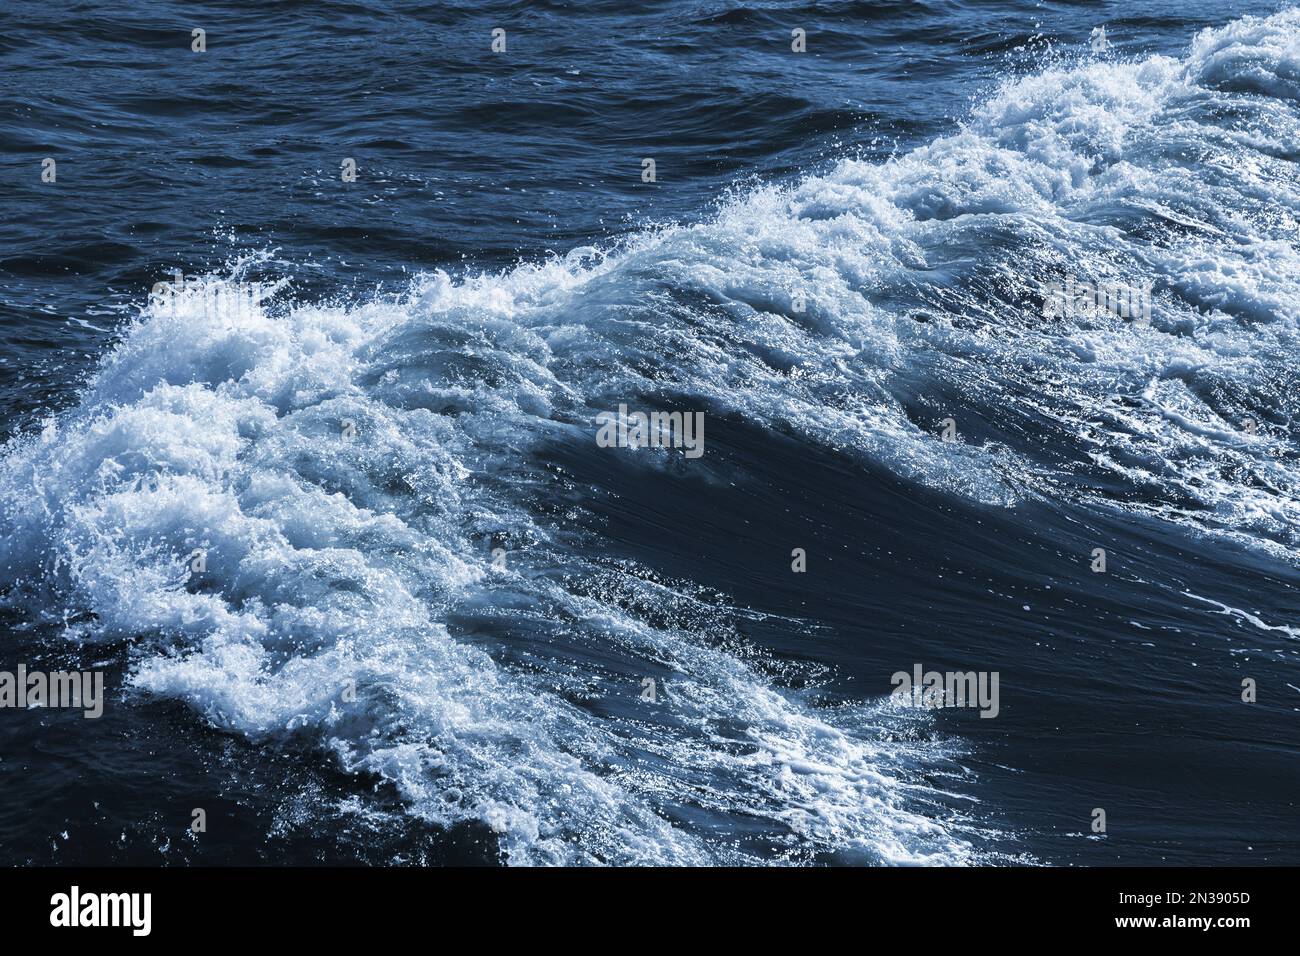 Sea wave with white foam on deep blue water, natural background photo Stock Photo